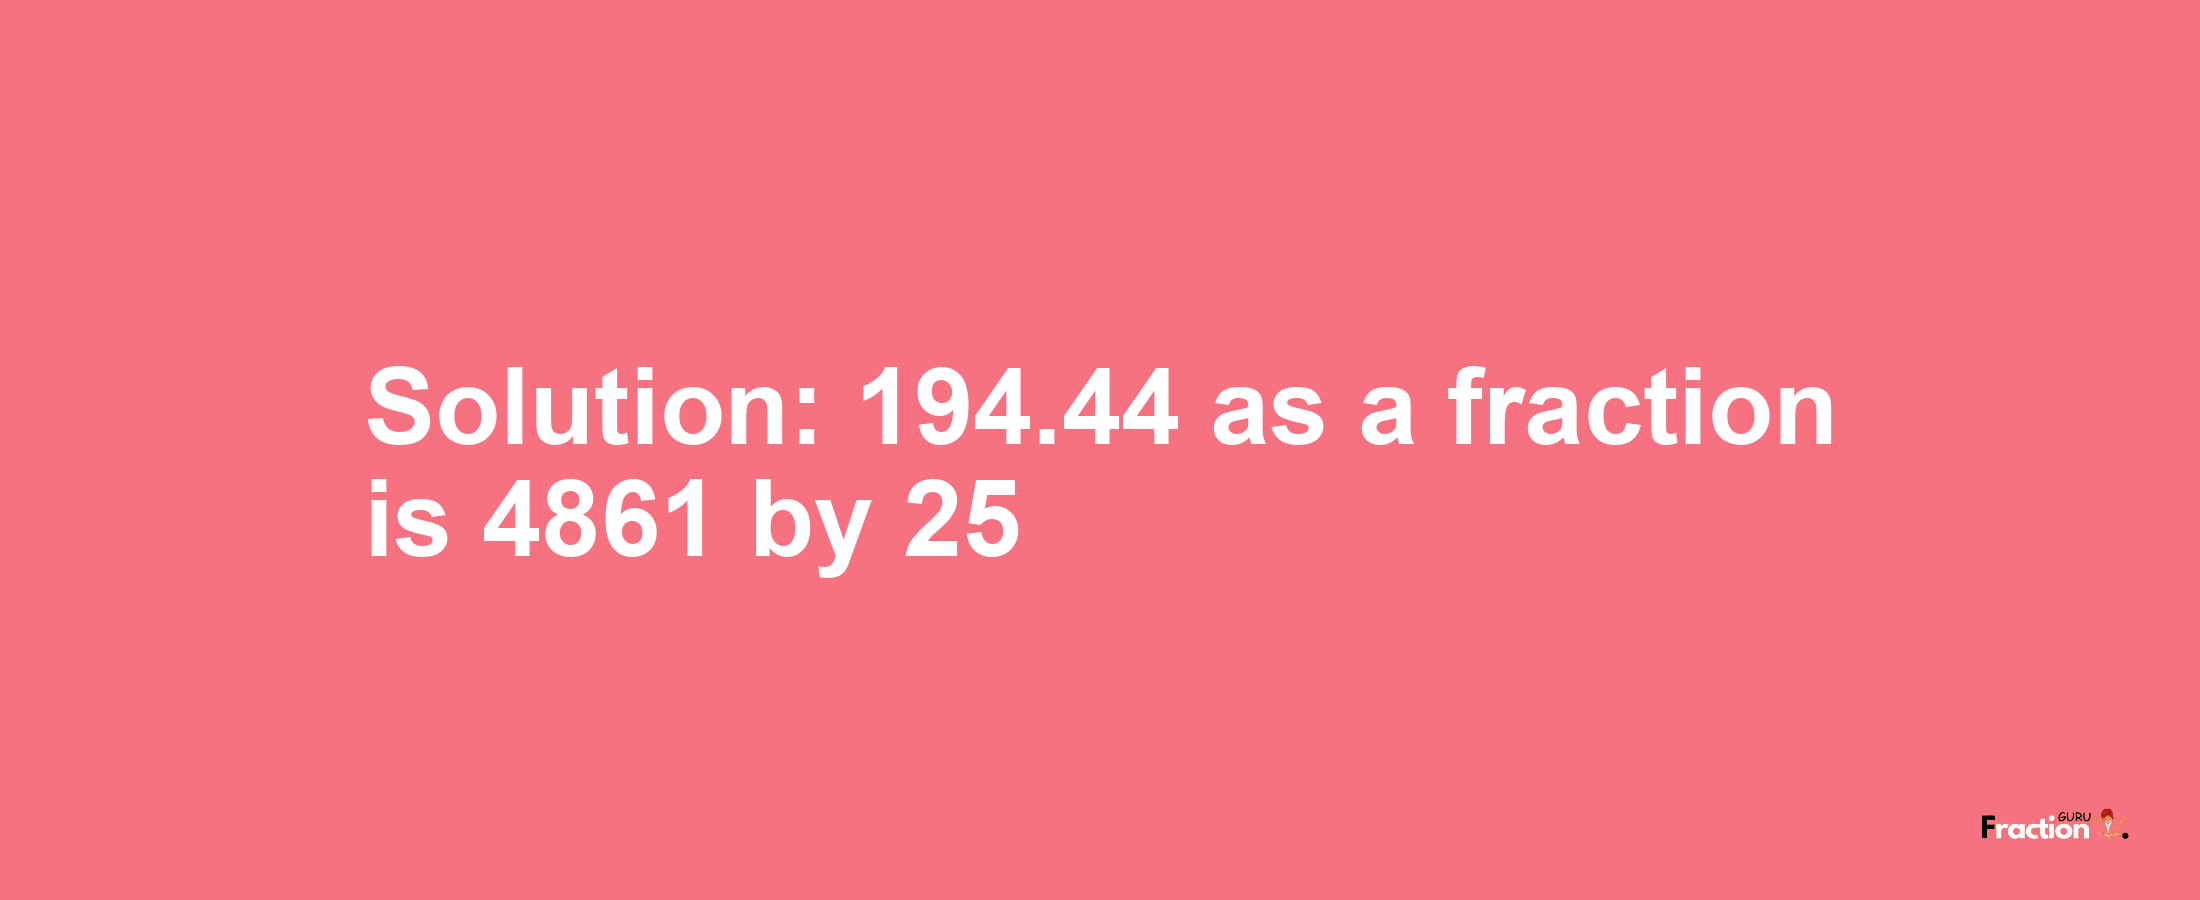 Solution:194.44 as a fraction is 4861/25